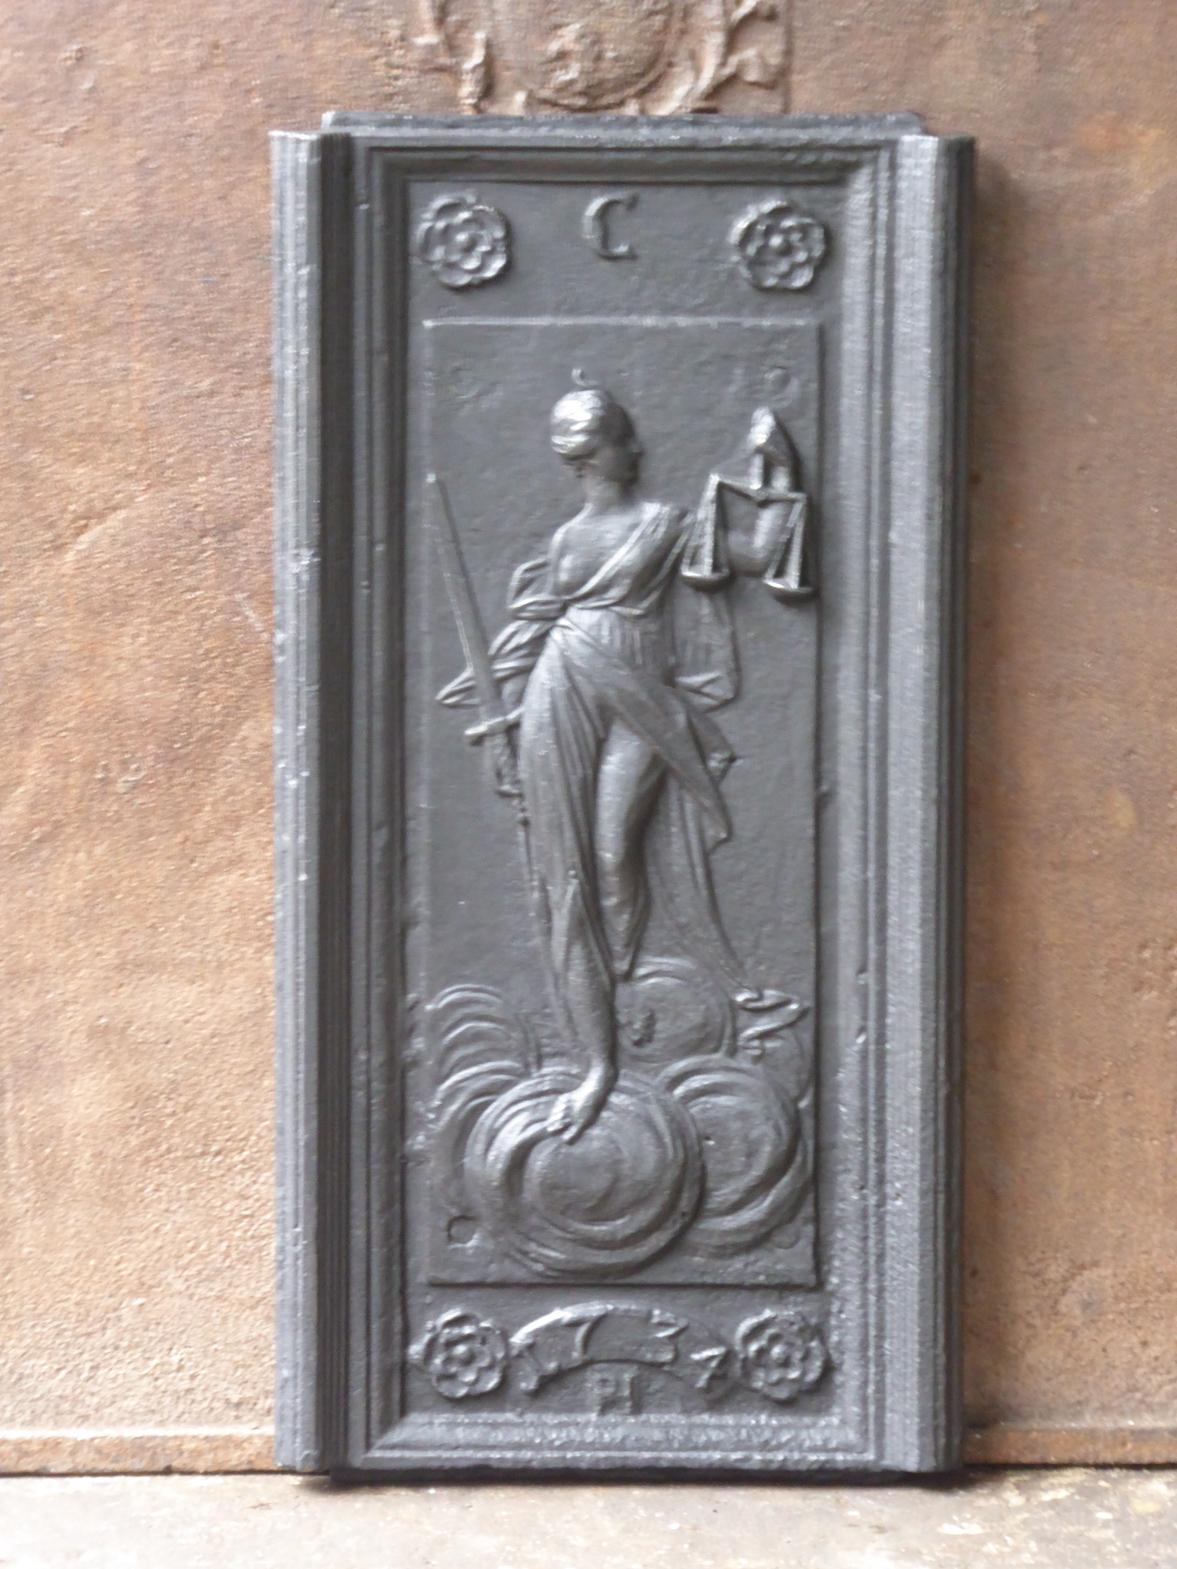 18th century German Louis XV fireback with Justice. The personification of justice balancing the scales of truth and fairness dates back to the Goddess Maat, and later Isis, of ancient Egypt.

The fireback is made of cast iron and has a black /